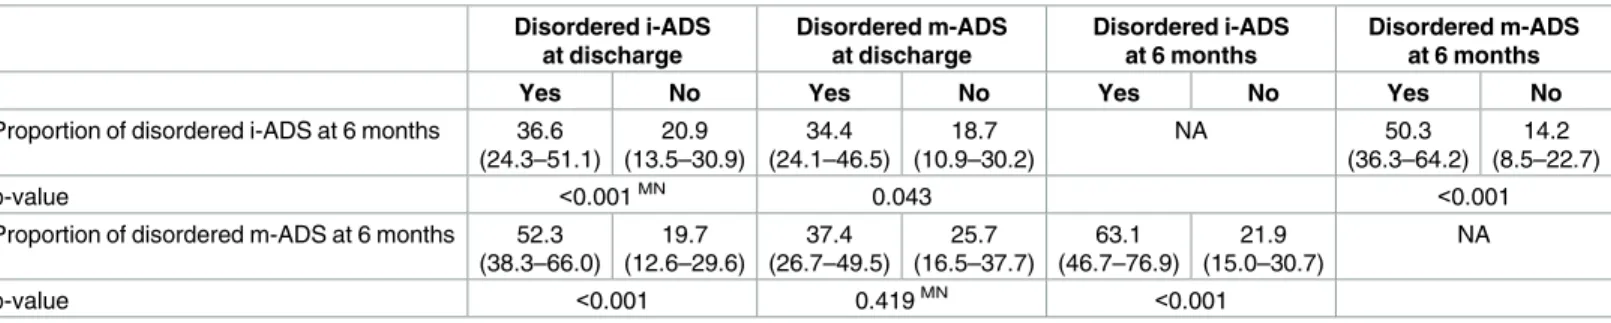 Table 5. Relationships between disordered interaction at discharge and 6 months based on ADS infant (i-ADS) and mother (m-ADS) subscales.